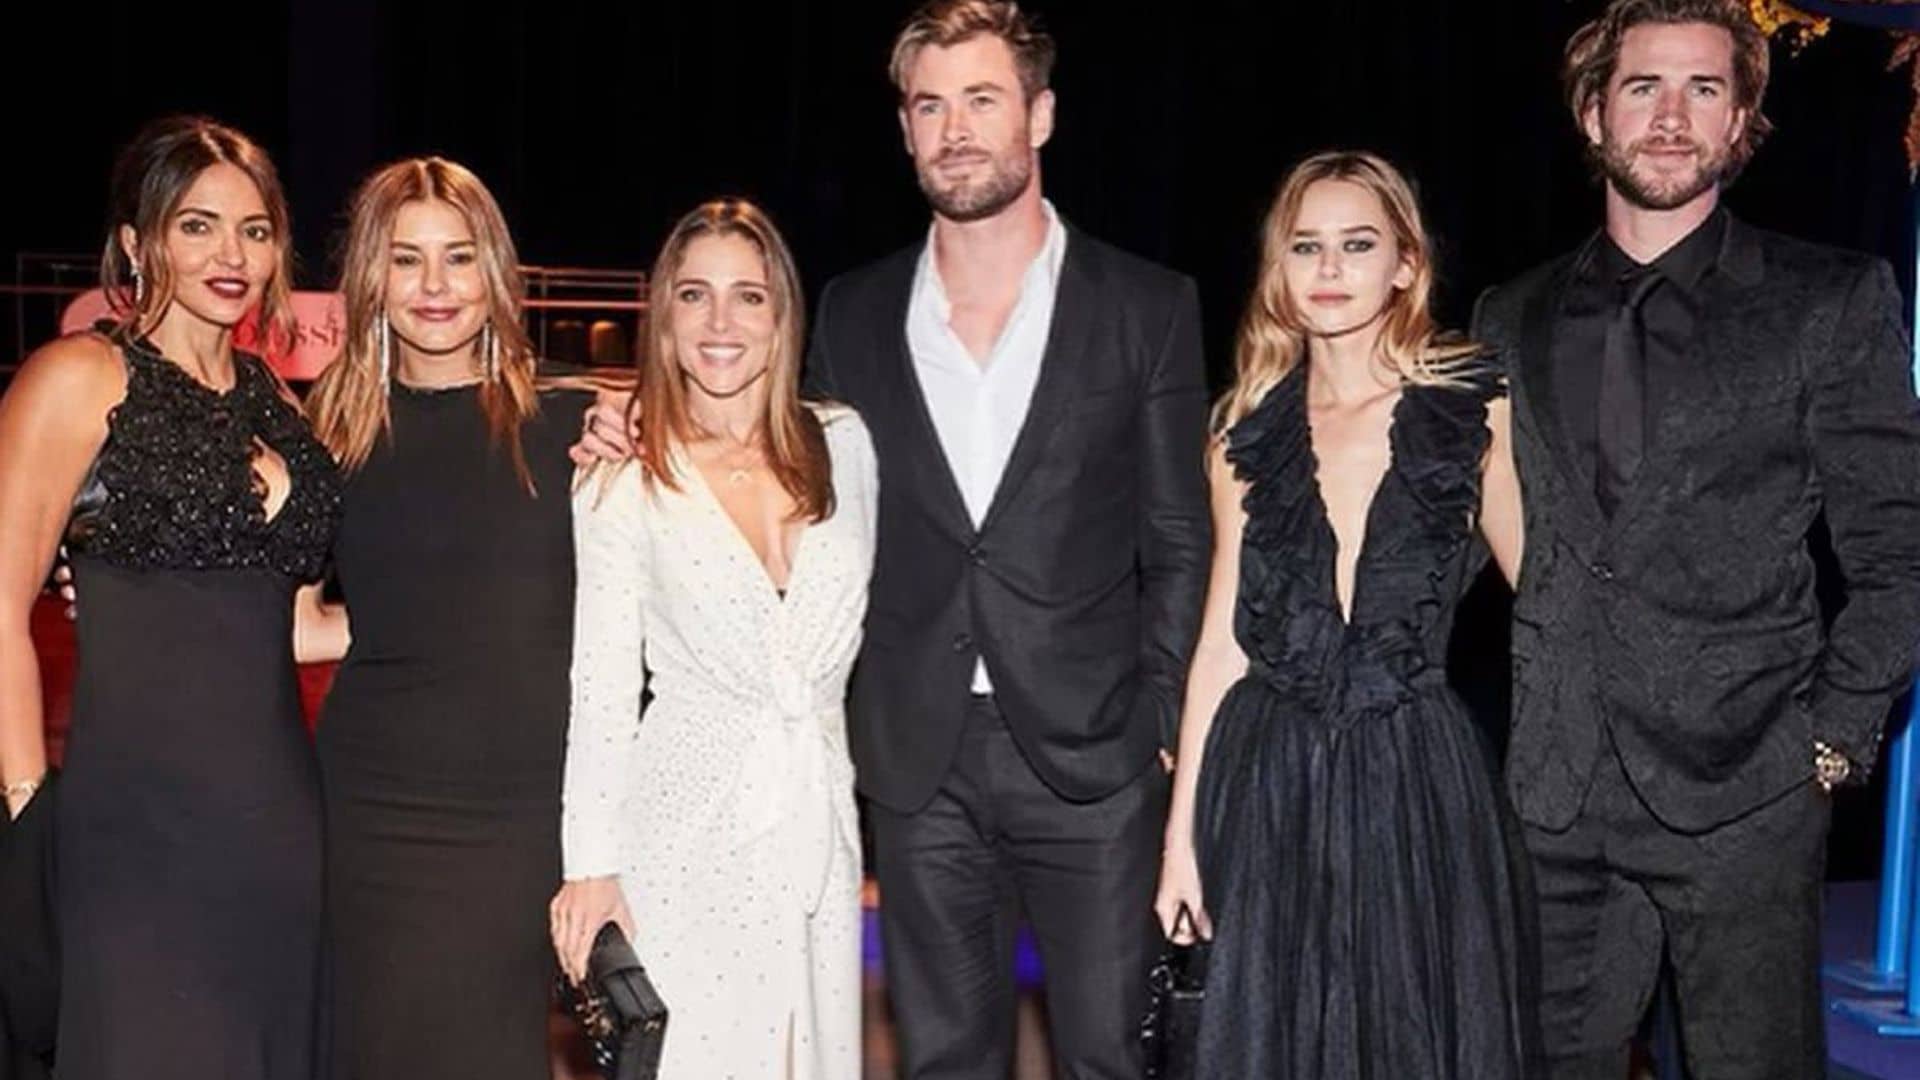 Liam Hemsworth and girlfriend Gabriella Brooks make their first public appearance together